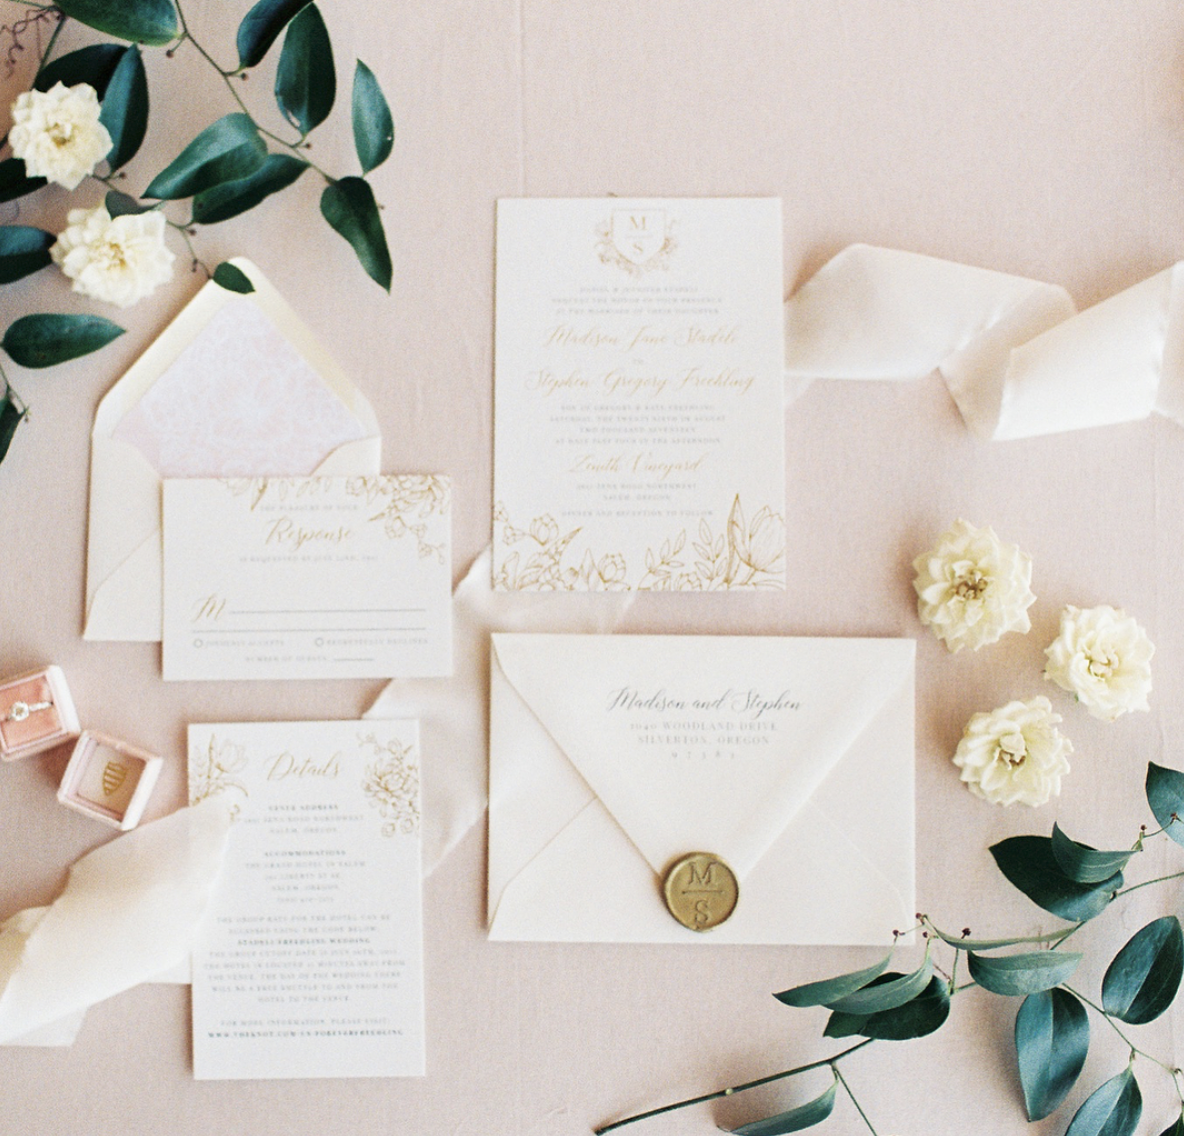 Photo by Jami Rae Photo, Invitation by Letters & Dust, Styling by Swoon Event Design, Planning by Class Act Events